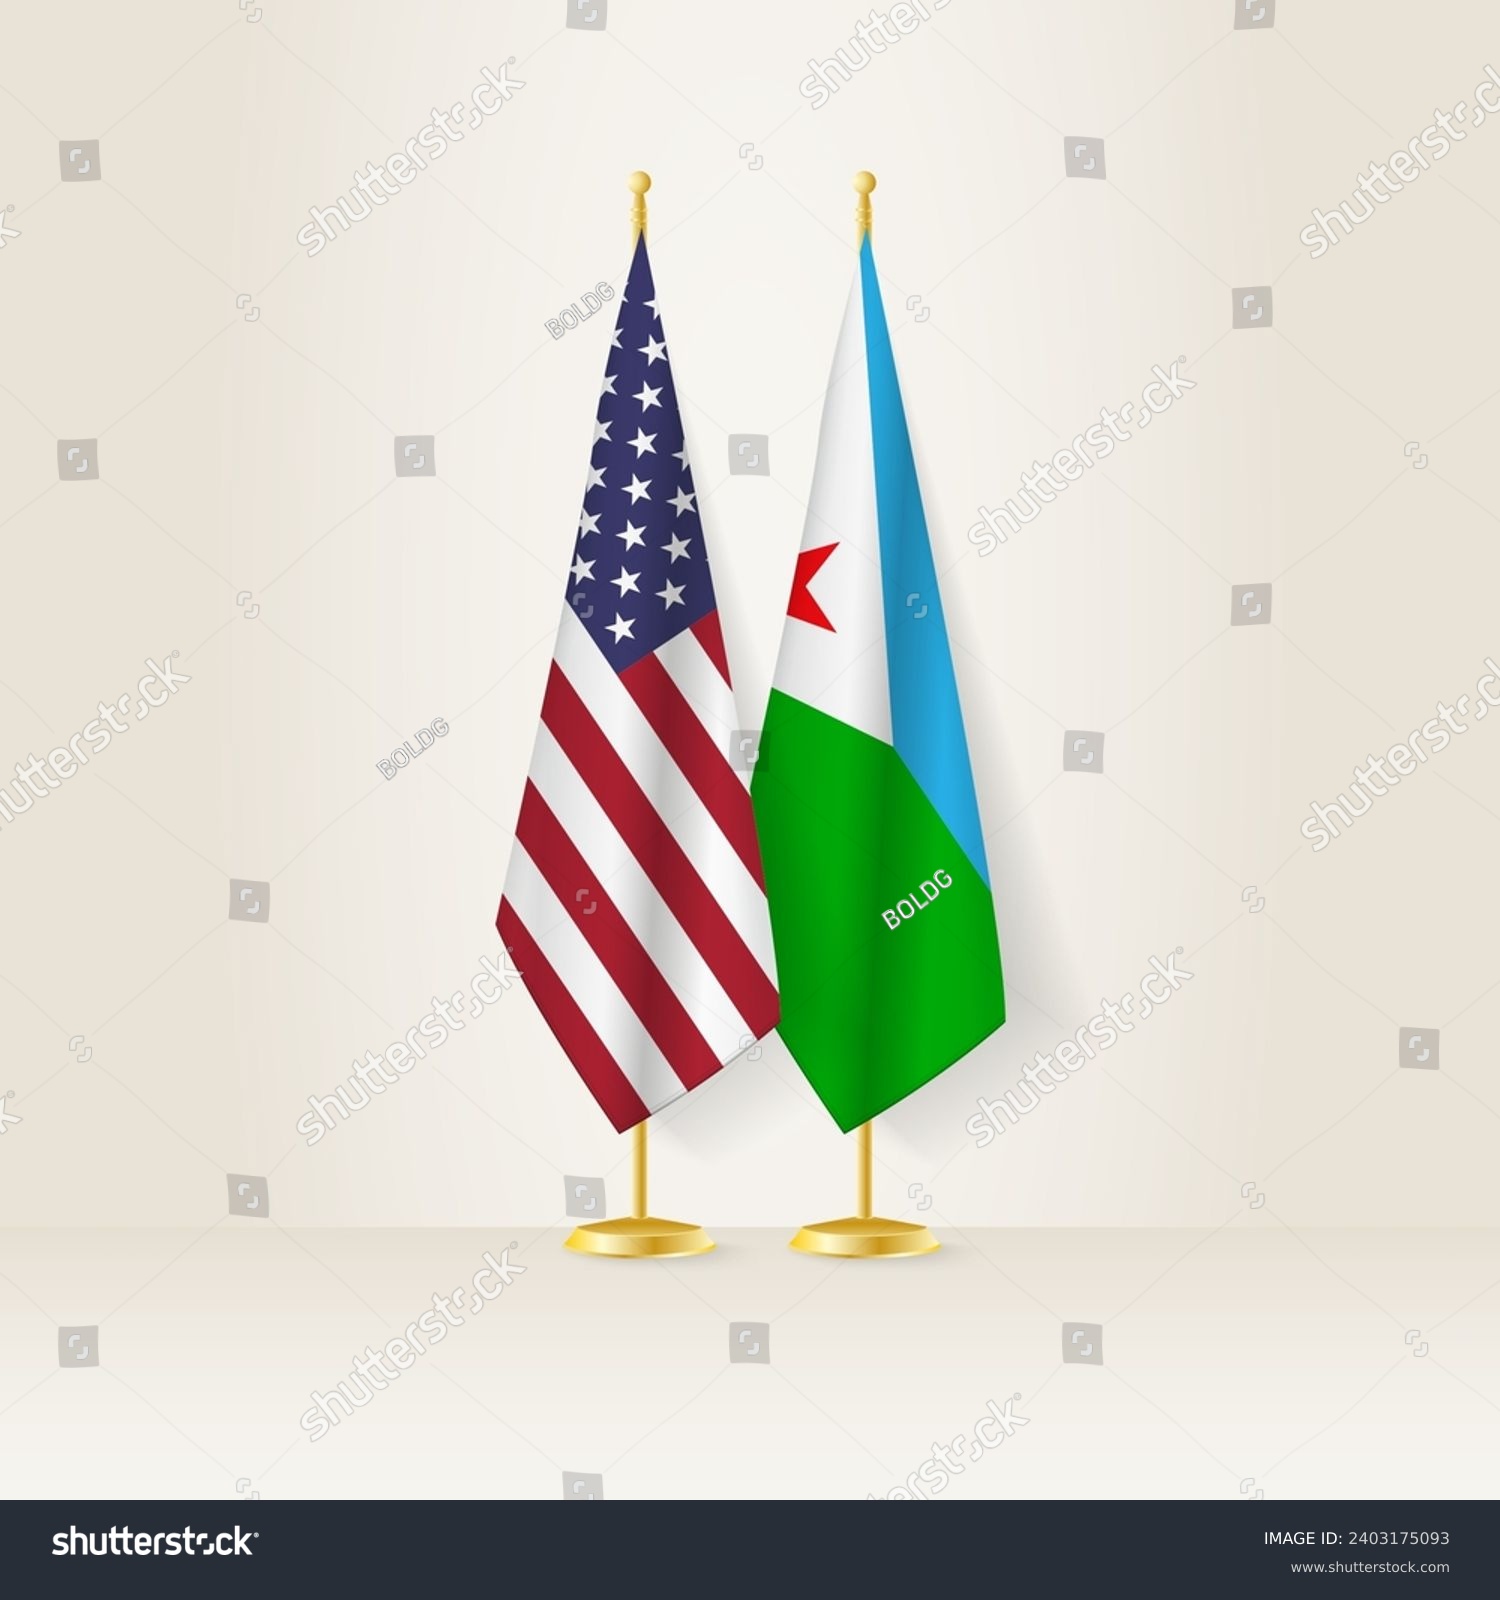 SVG of United States and Djibouti national flag on a light background. Vector illustration. svg